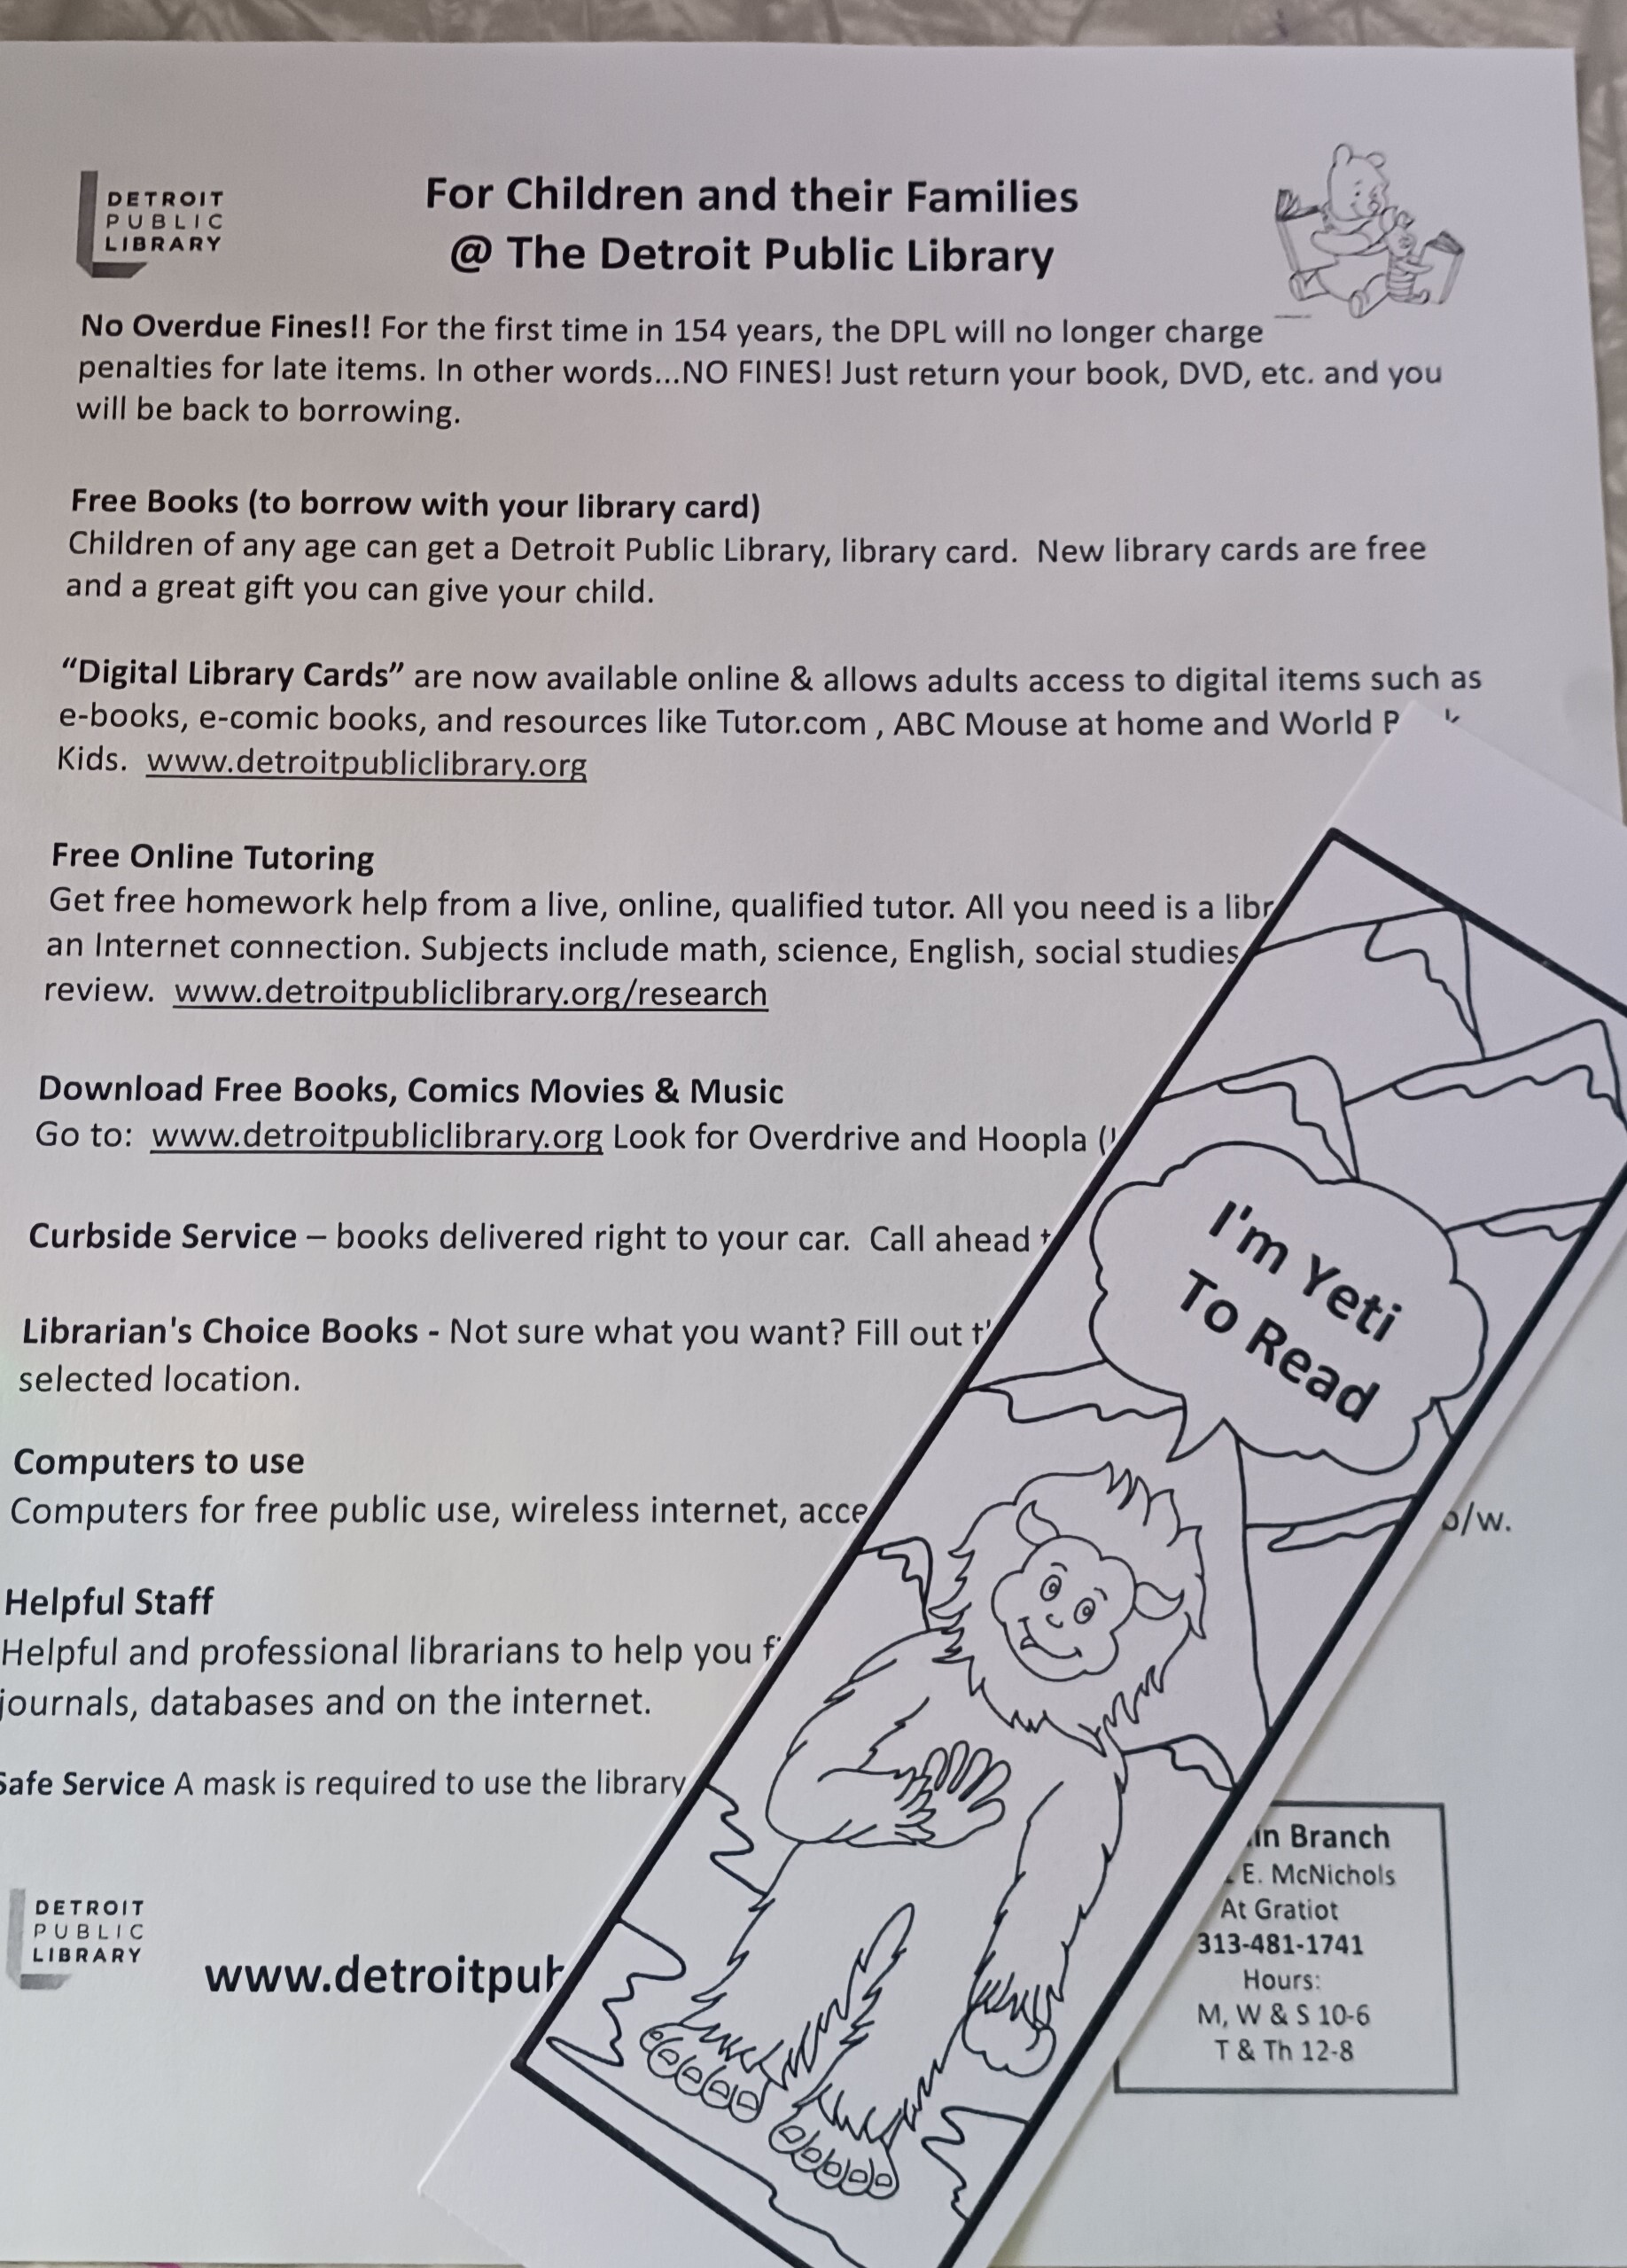 library flyer